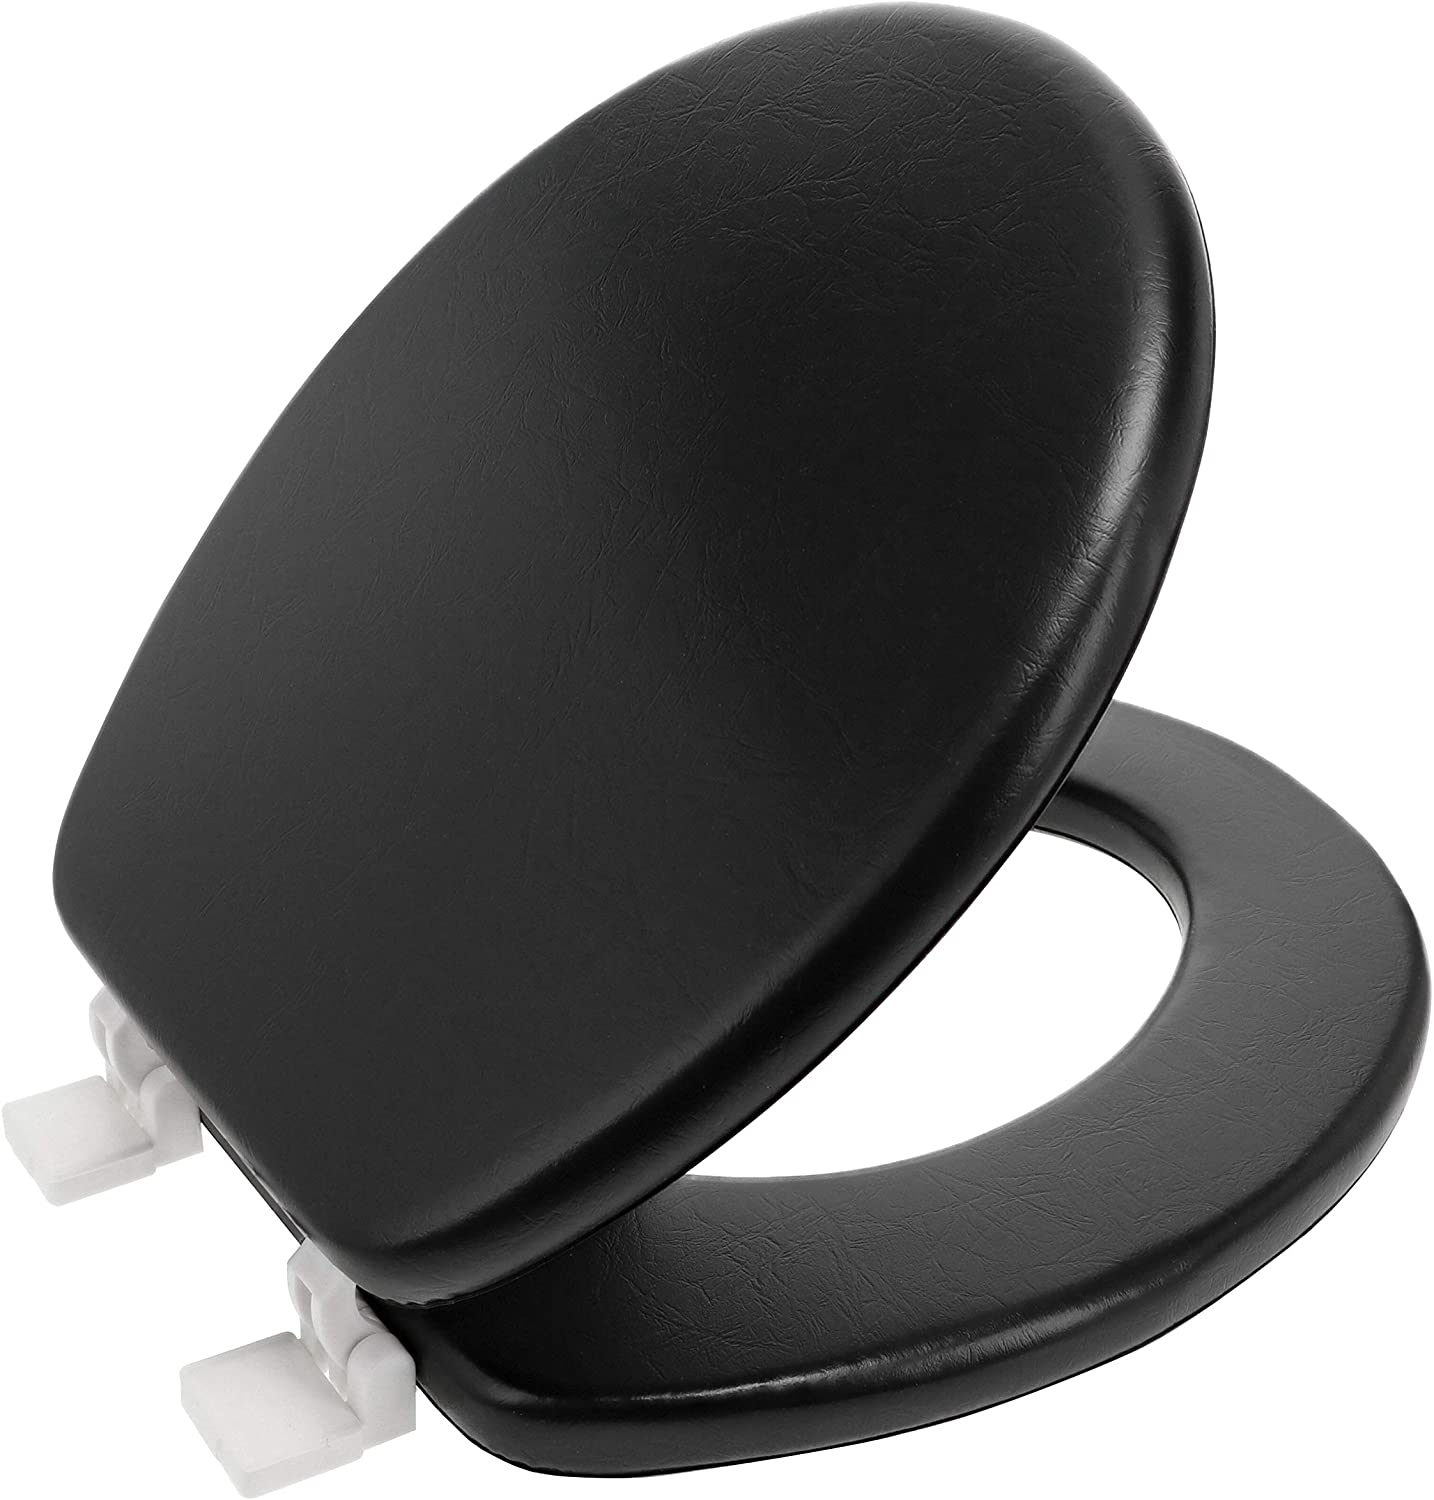 Ginsey Standard Soft Toilet Seat